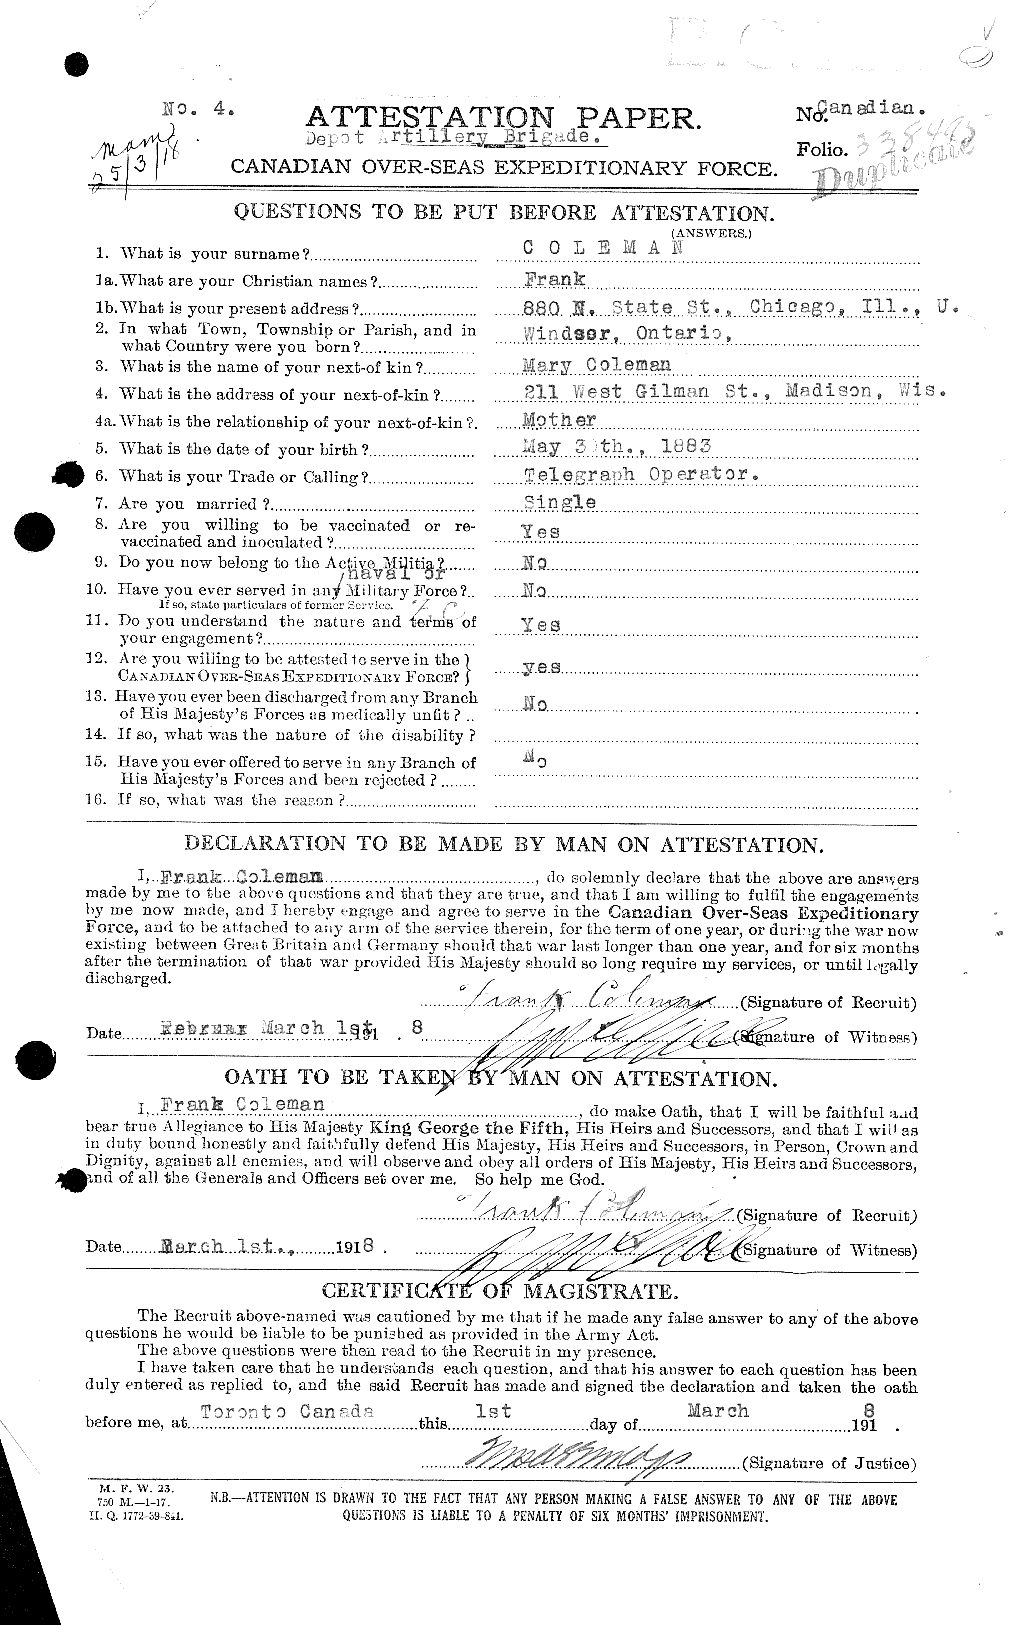 Personnel Records of the First World War - CEF 028124a